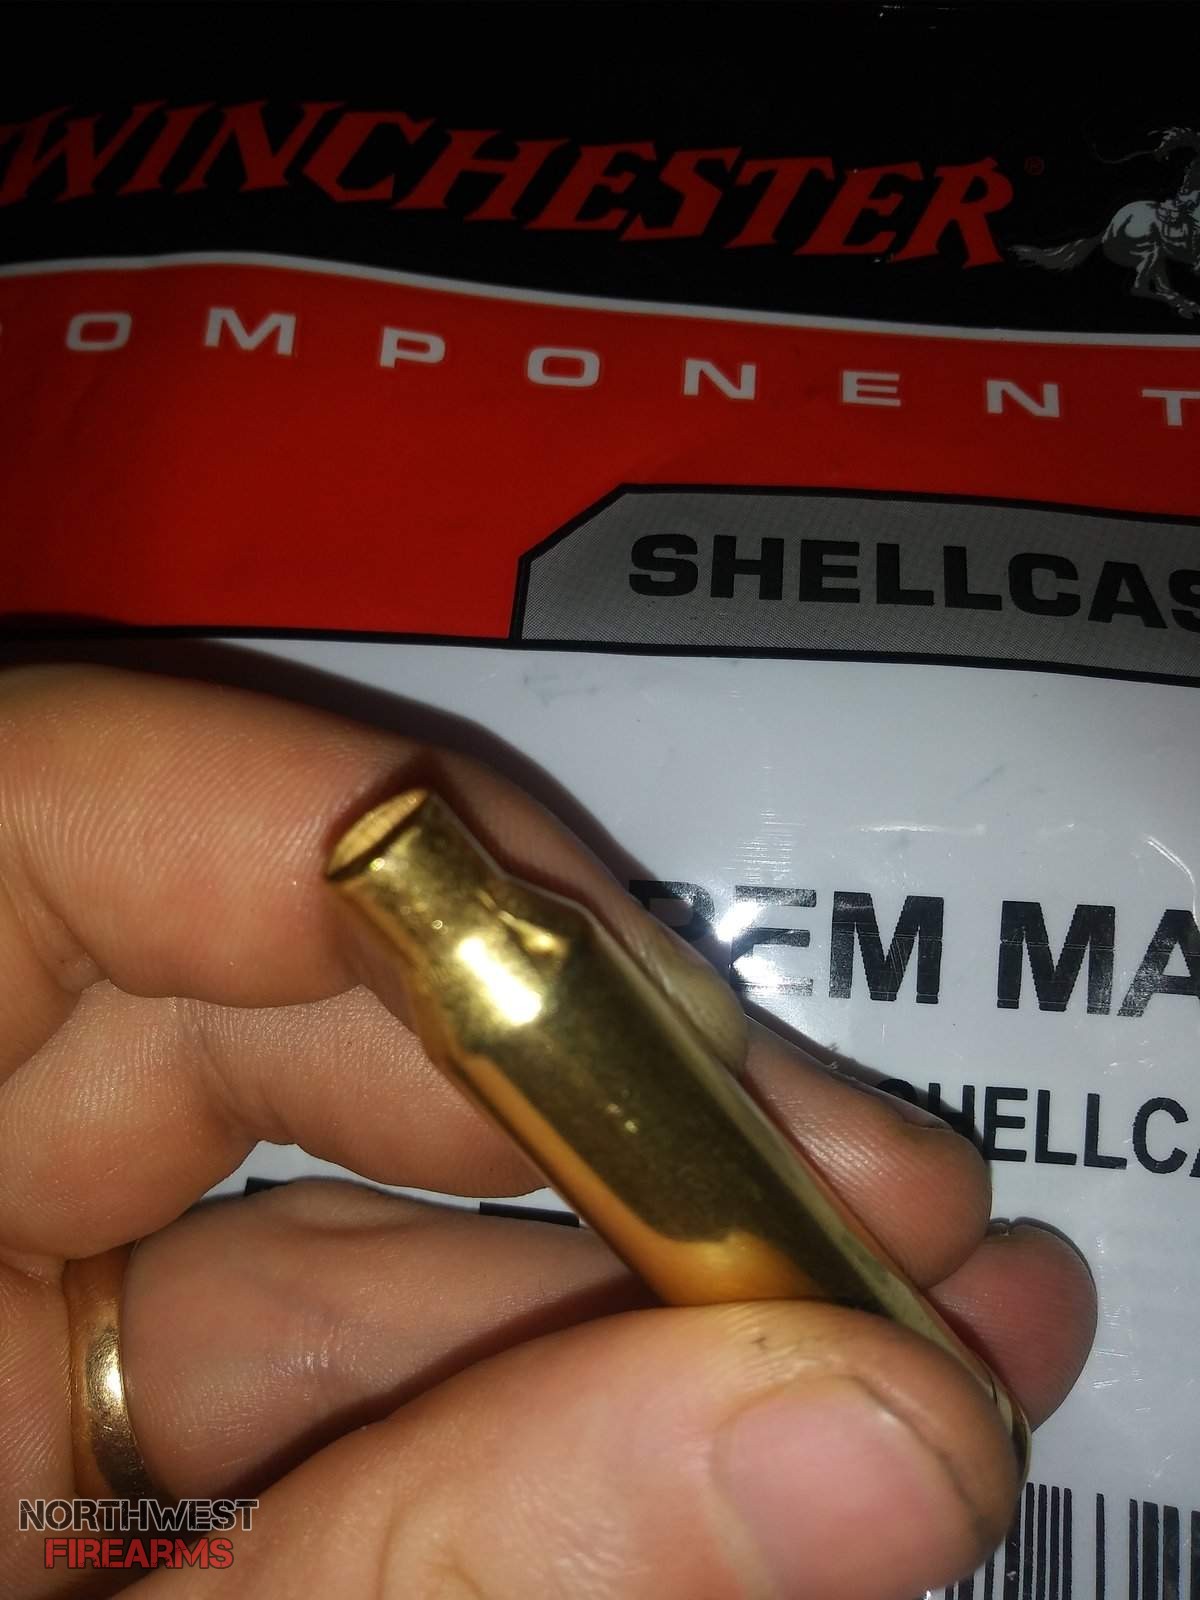 Problems with brand new winchester brass